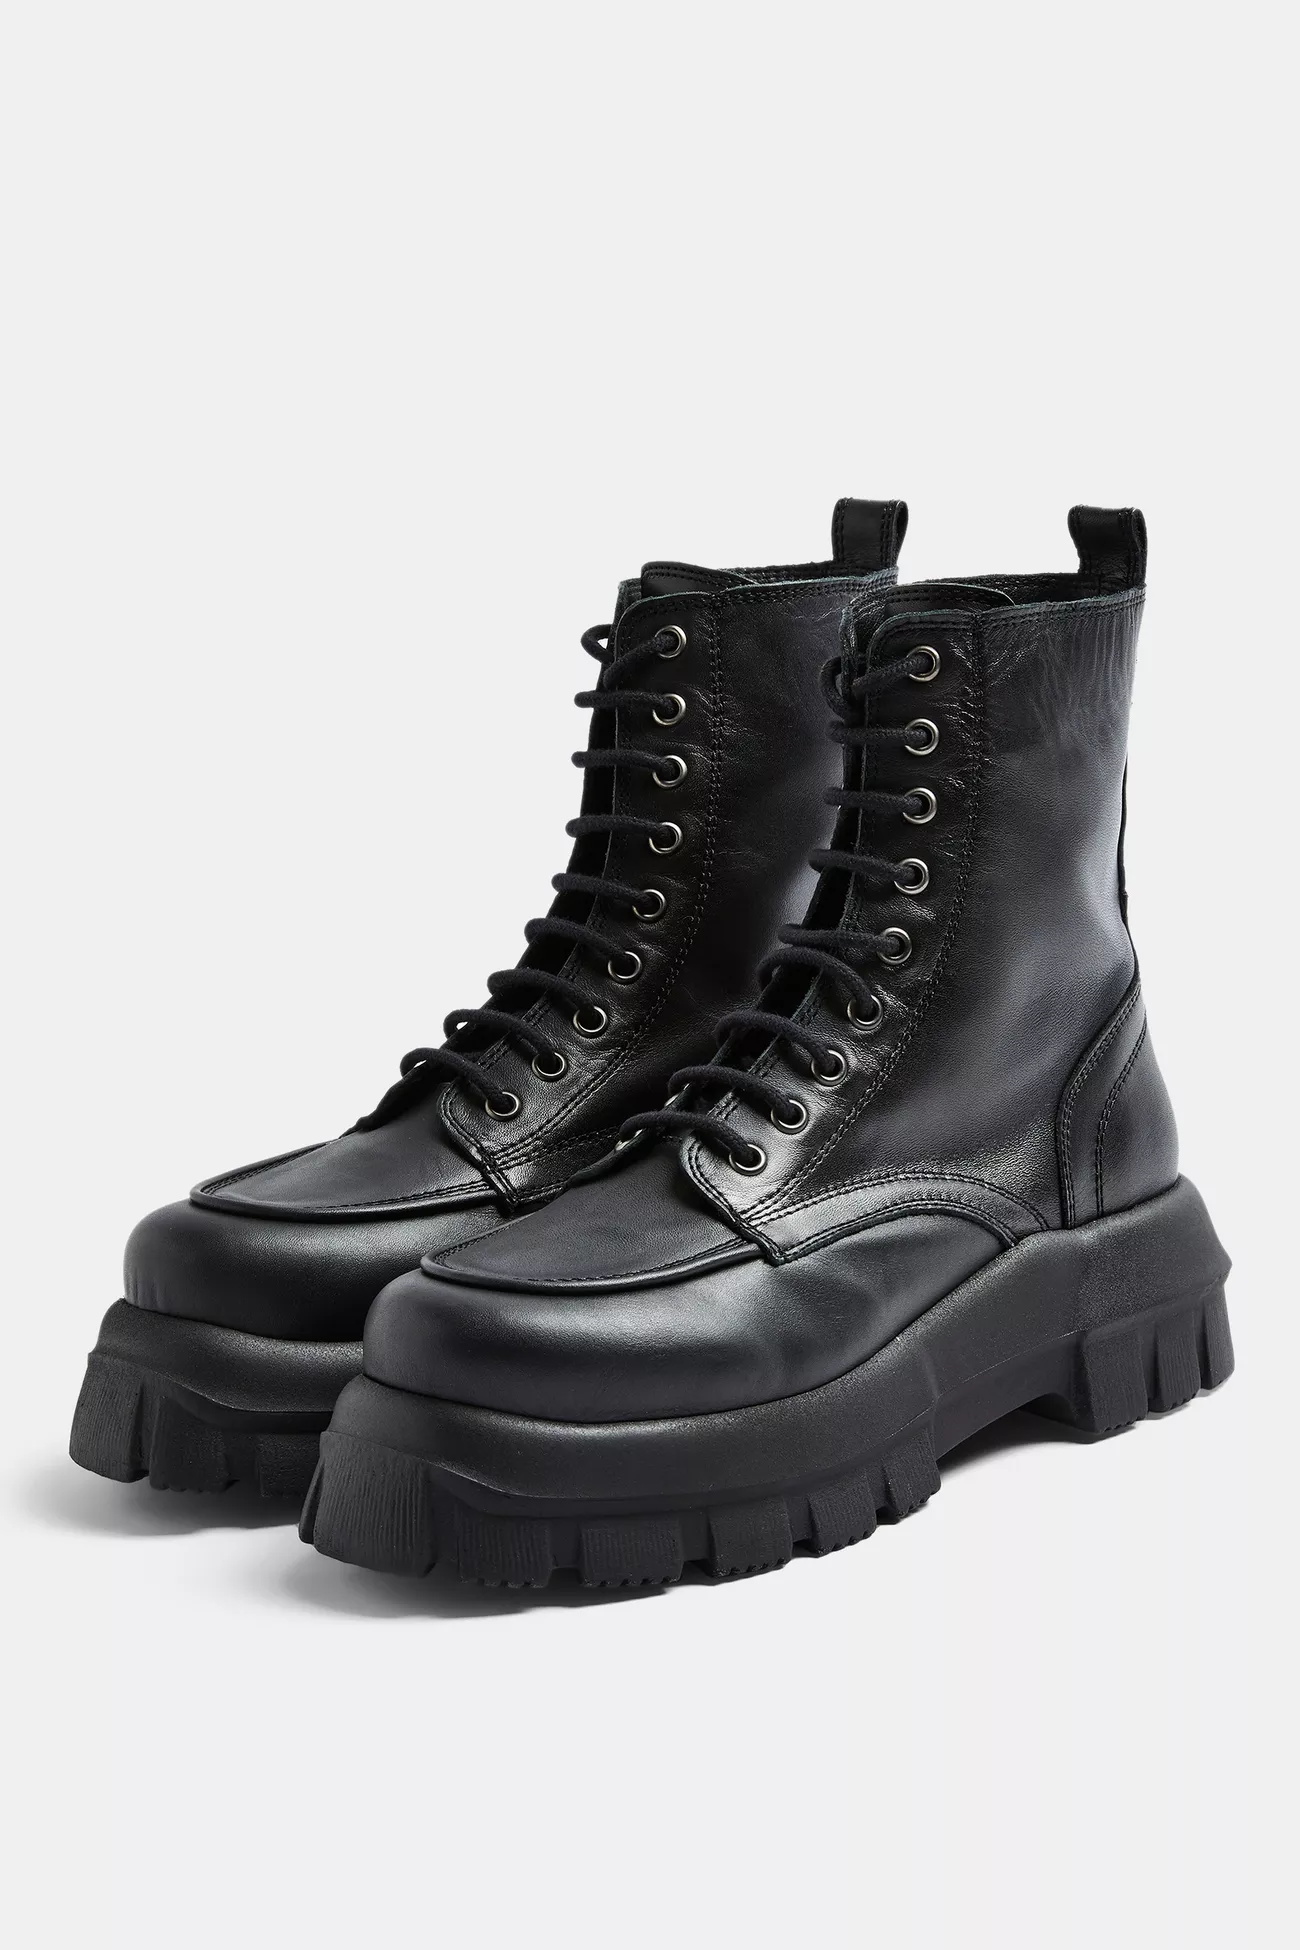 Cute Combat Boot Styles - Military 